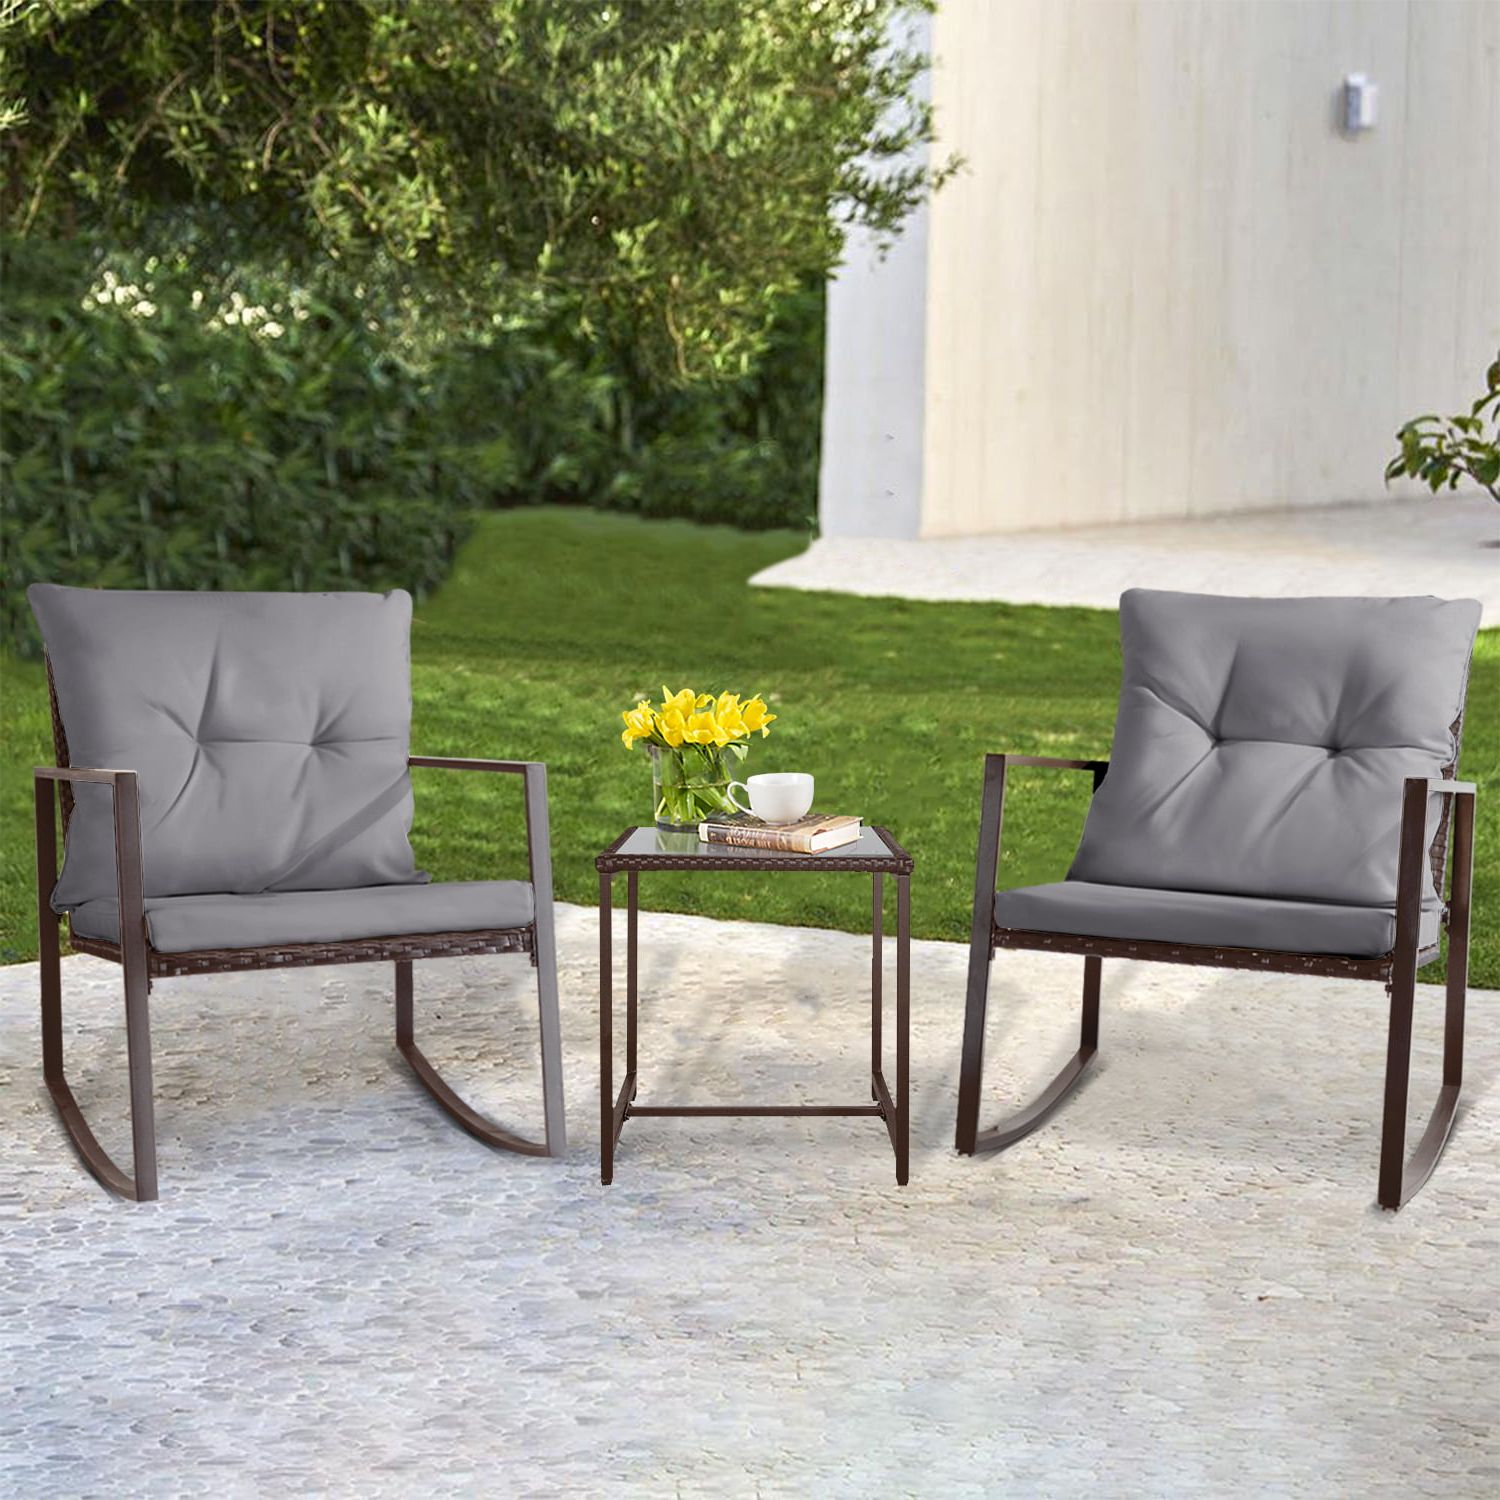 Suncrown Outdoor 3 Piece Rocking Bistro Set, Black Wicker Furniture Two  Chairs With Glass Coffee Table (light Blue Cushion) – Walmart With Recent 3 Piece Cushion Rocking Chair Set (View 7 of 15)